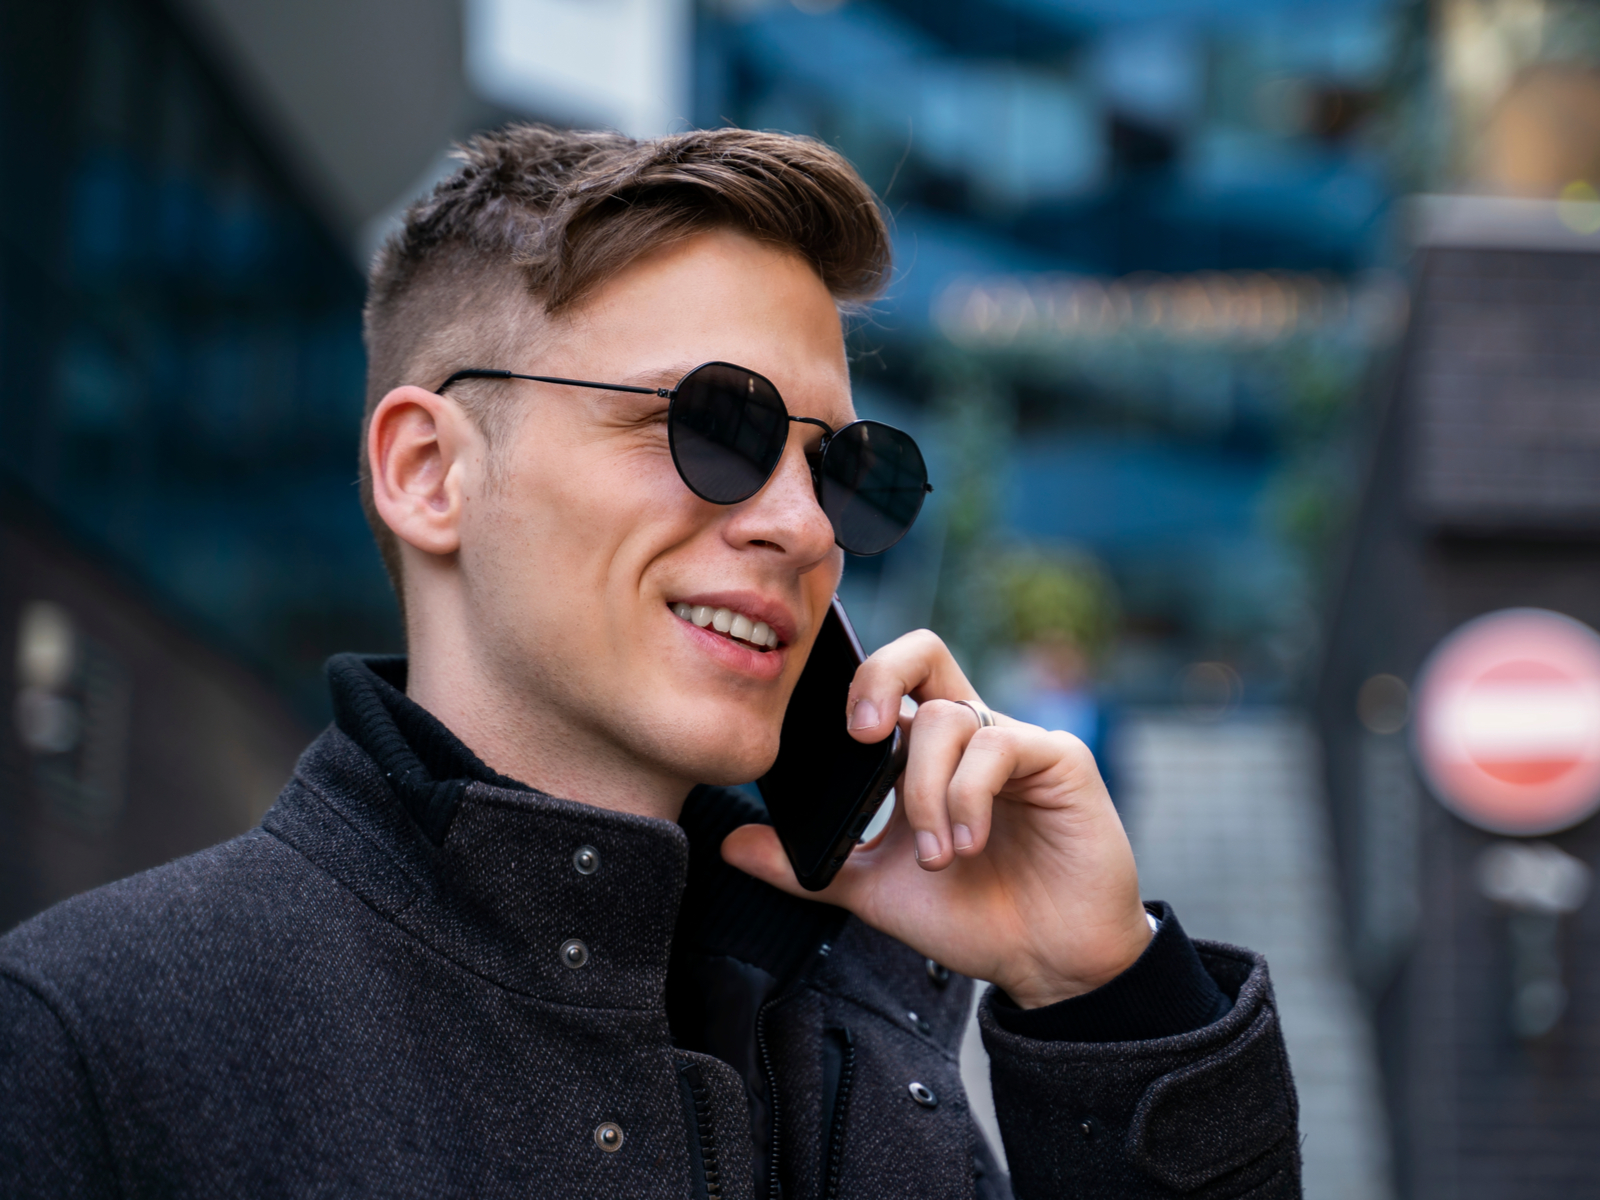 As a featured straight hair men's hairstyle, a High Fade With Rolled Quiff is pictured on a guy talking on his phone